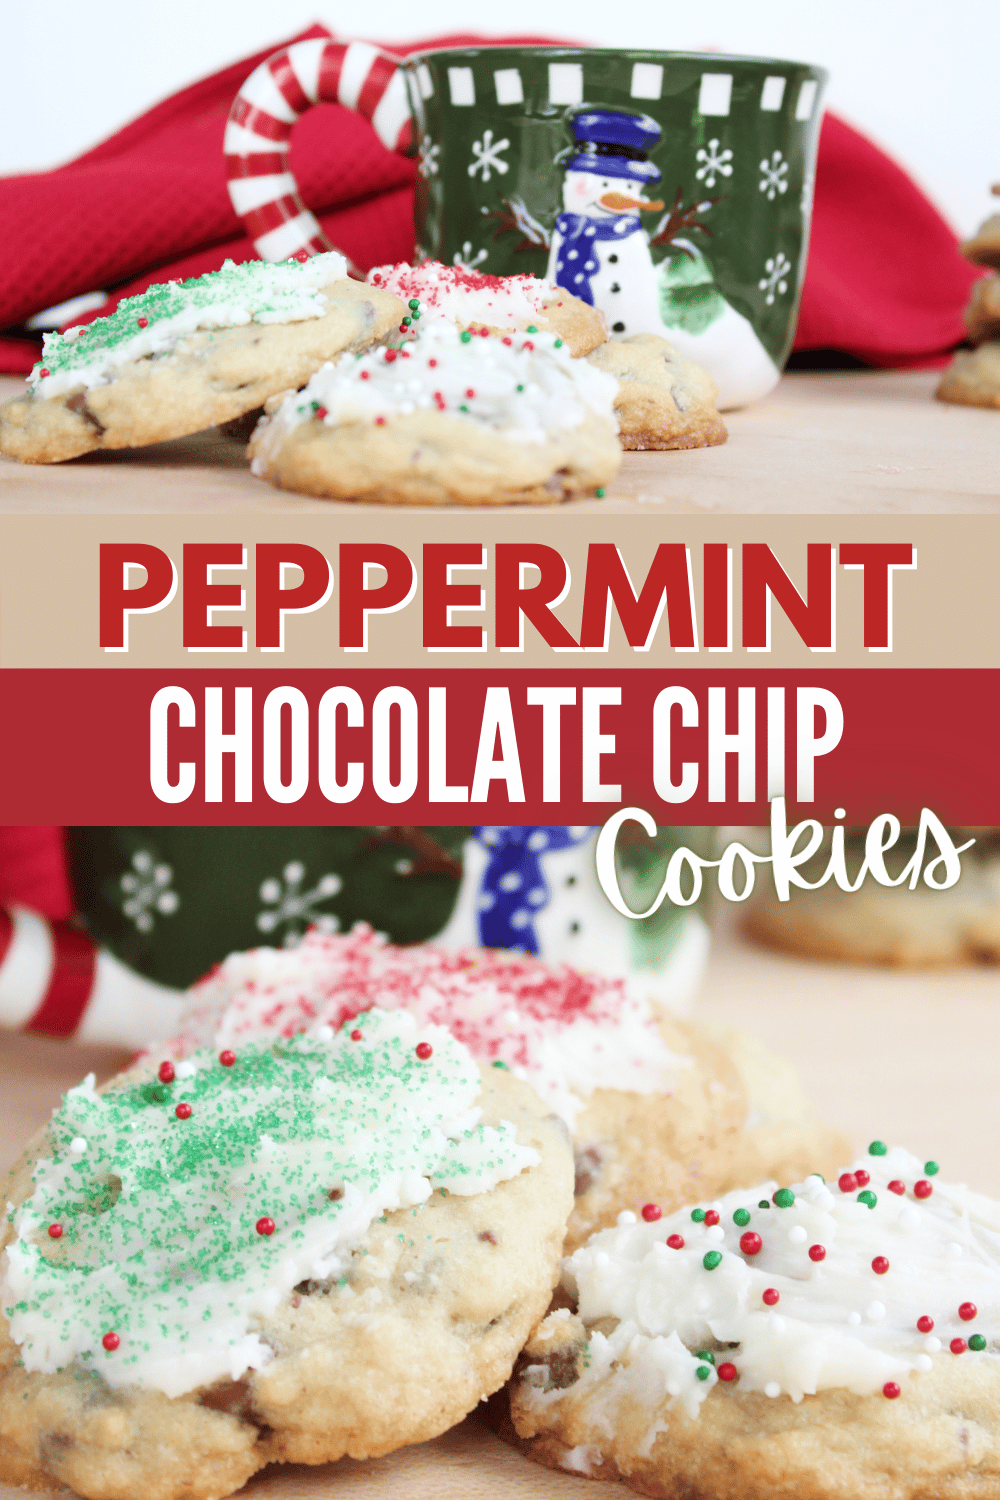 These Peppermint Chocolate Chip Cookies are perfect for holiday baking. These soft and chewy cookies are a crave worthy holiday treat. #peppermintchocolatechipcookies #peppermint #chocolatechipcookies #christmascookies via @wondermomwannab